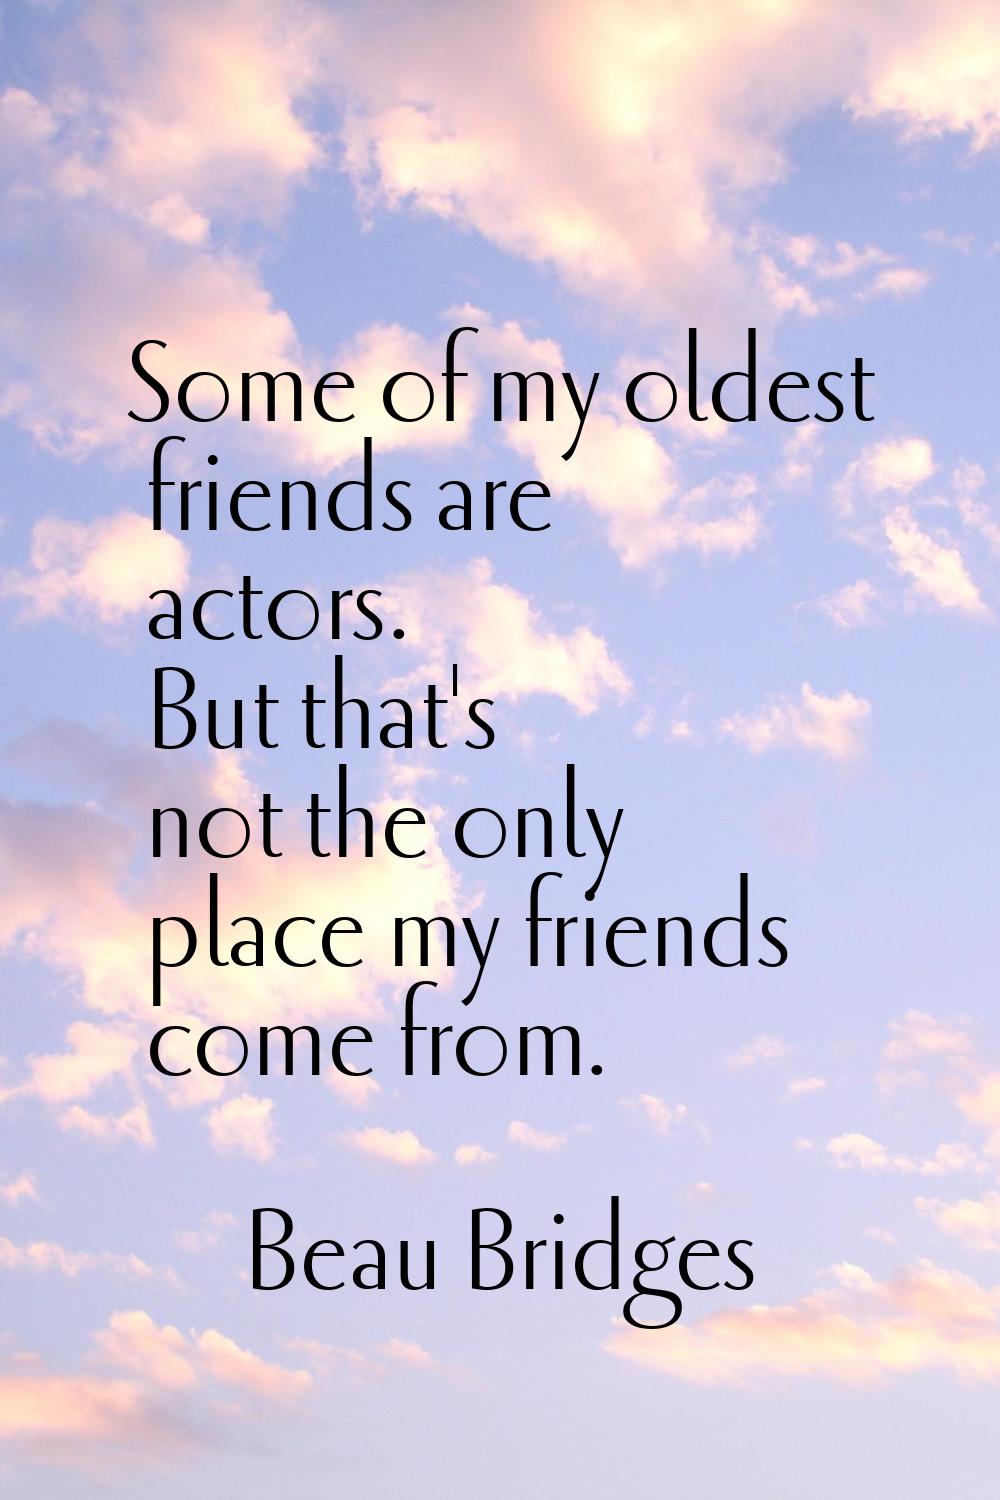 Some of my oldest friends are actors. But that's not the only place my friends come from.